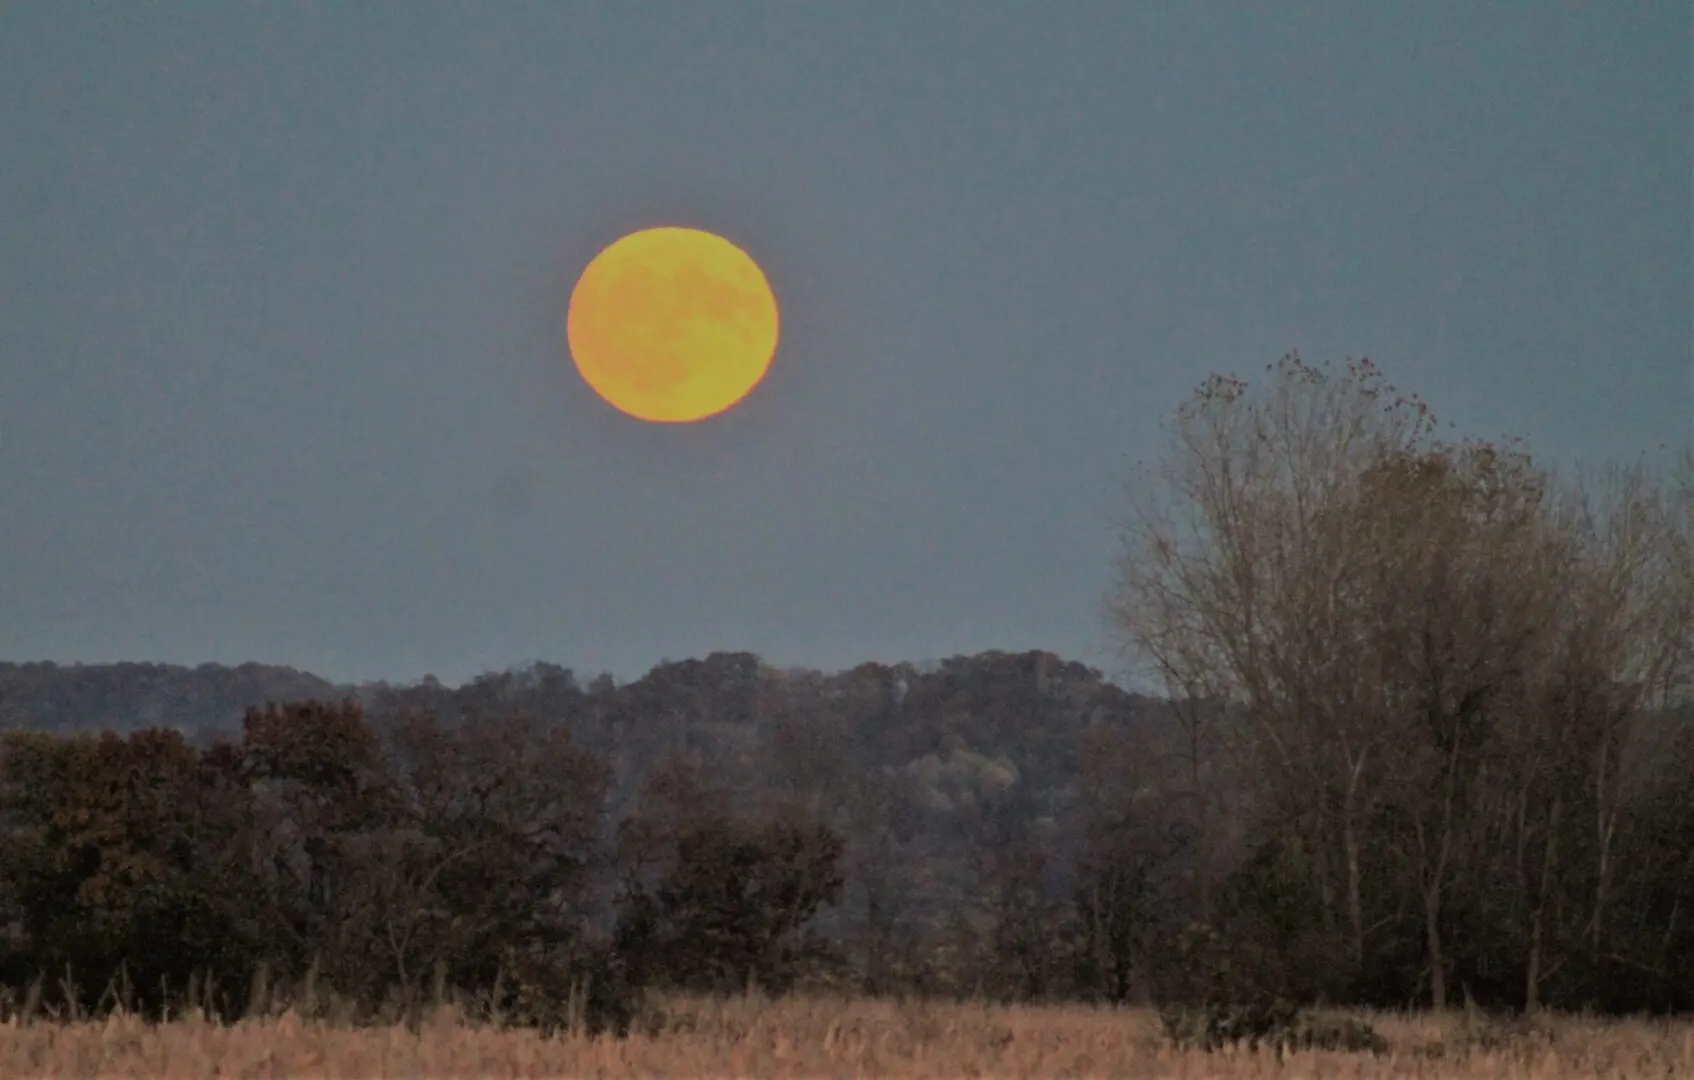 A full moon rises over a field of grass and trees.